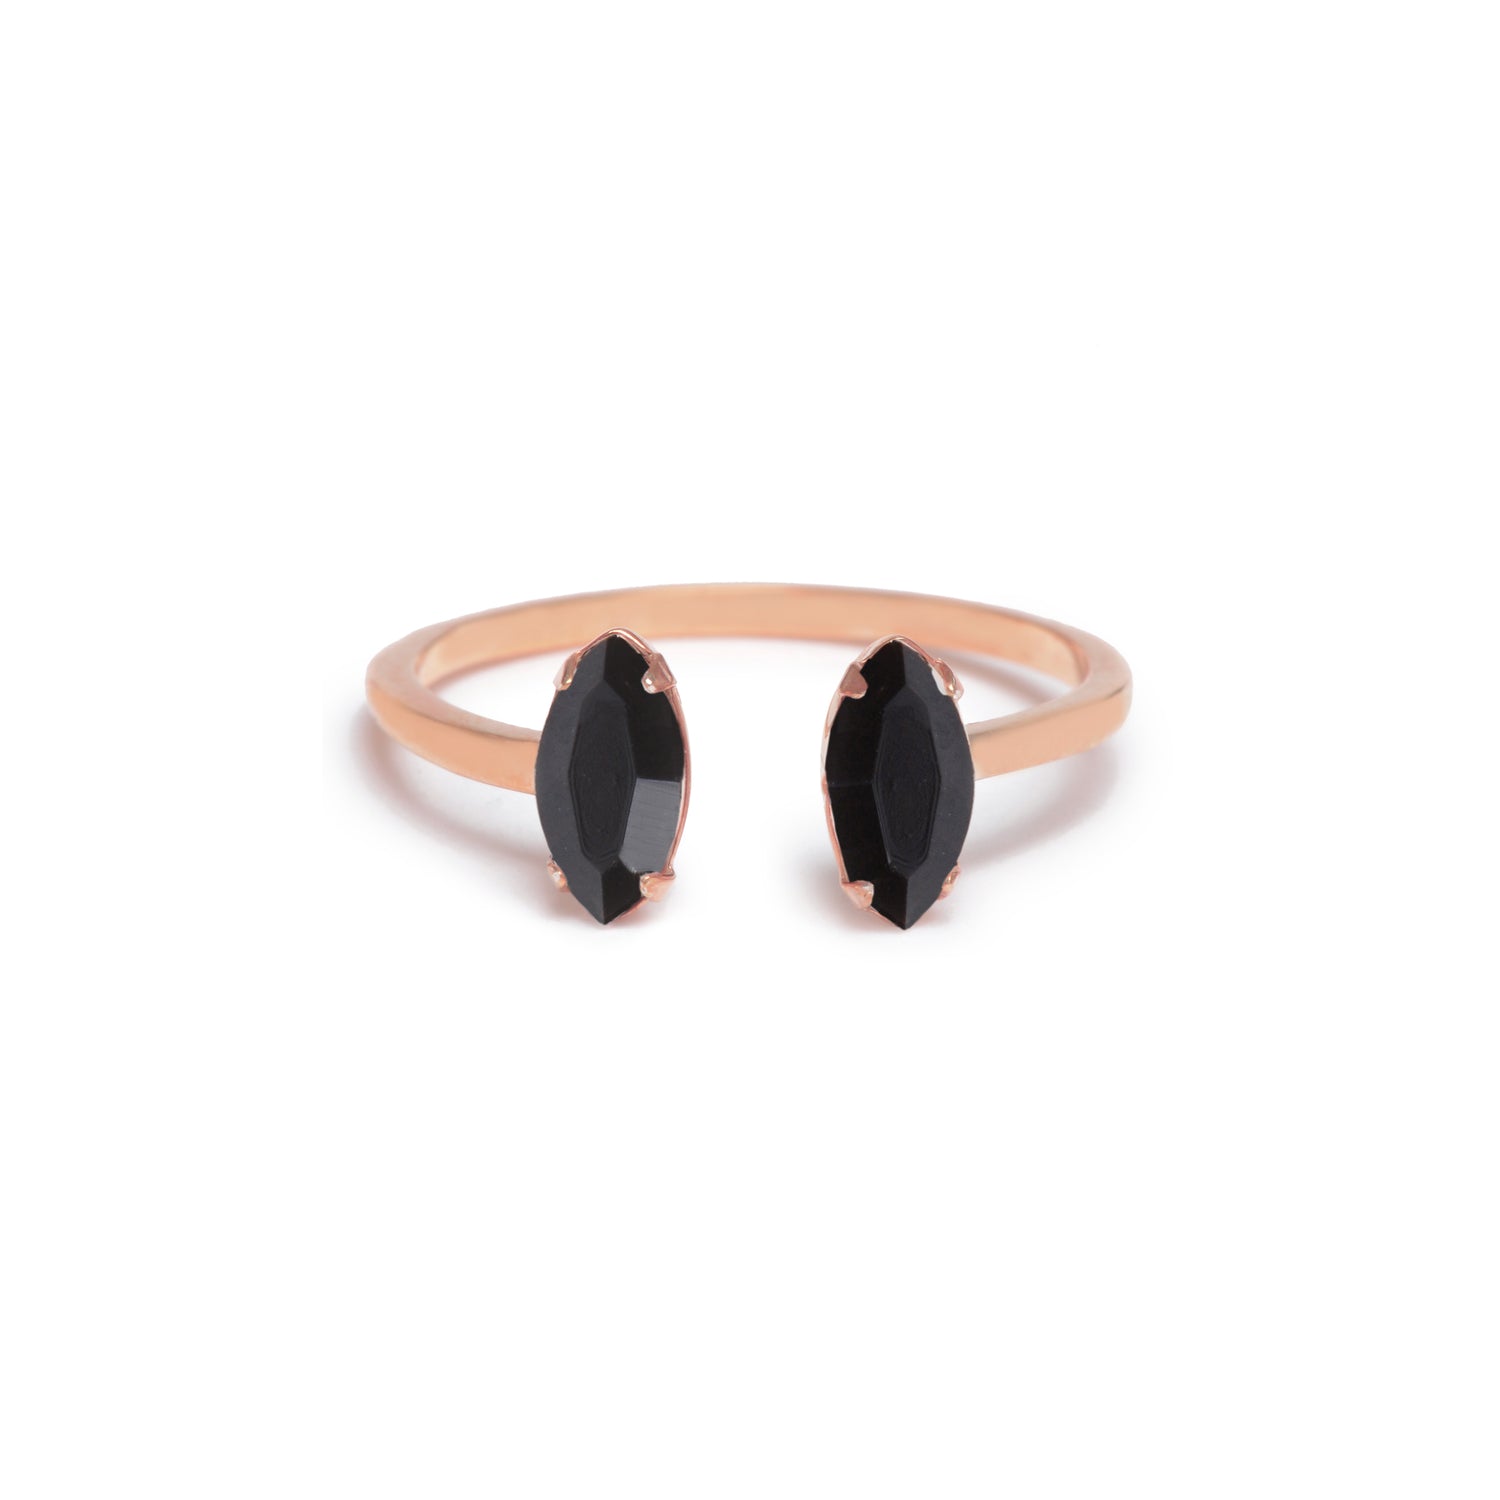 Double Marquis Ring - Jet - Bing Bang Jewelry NYC